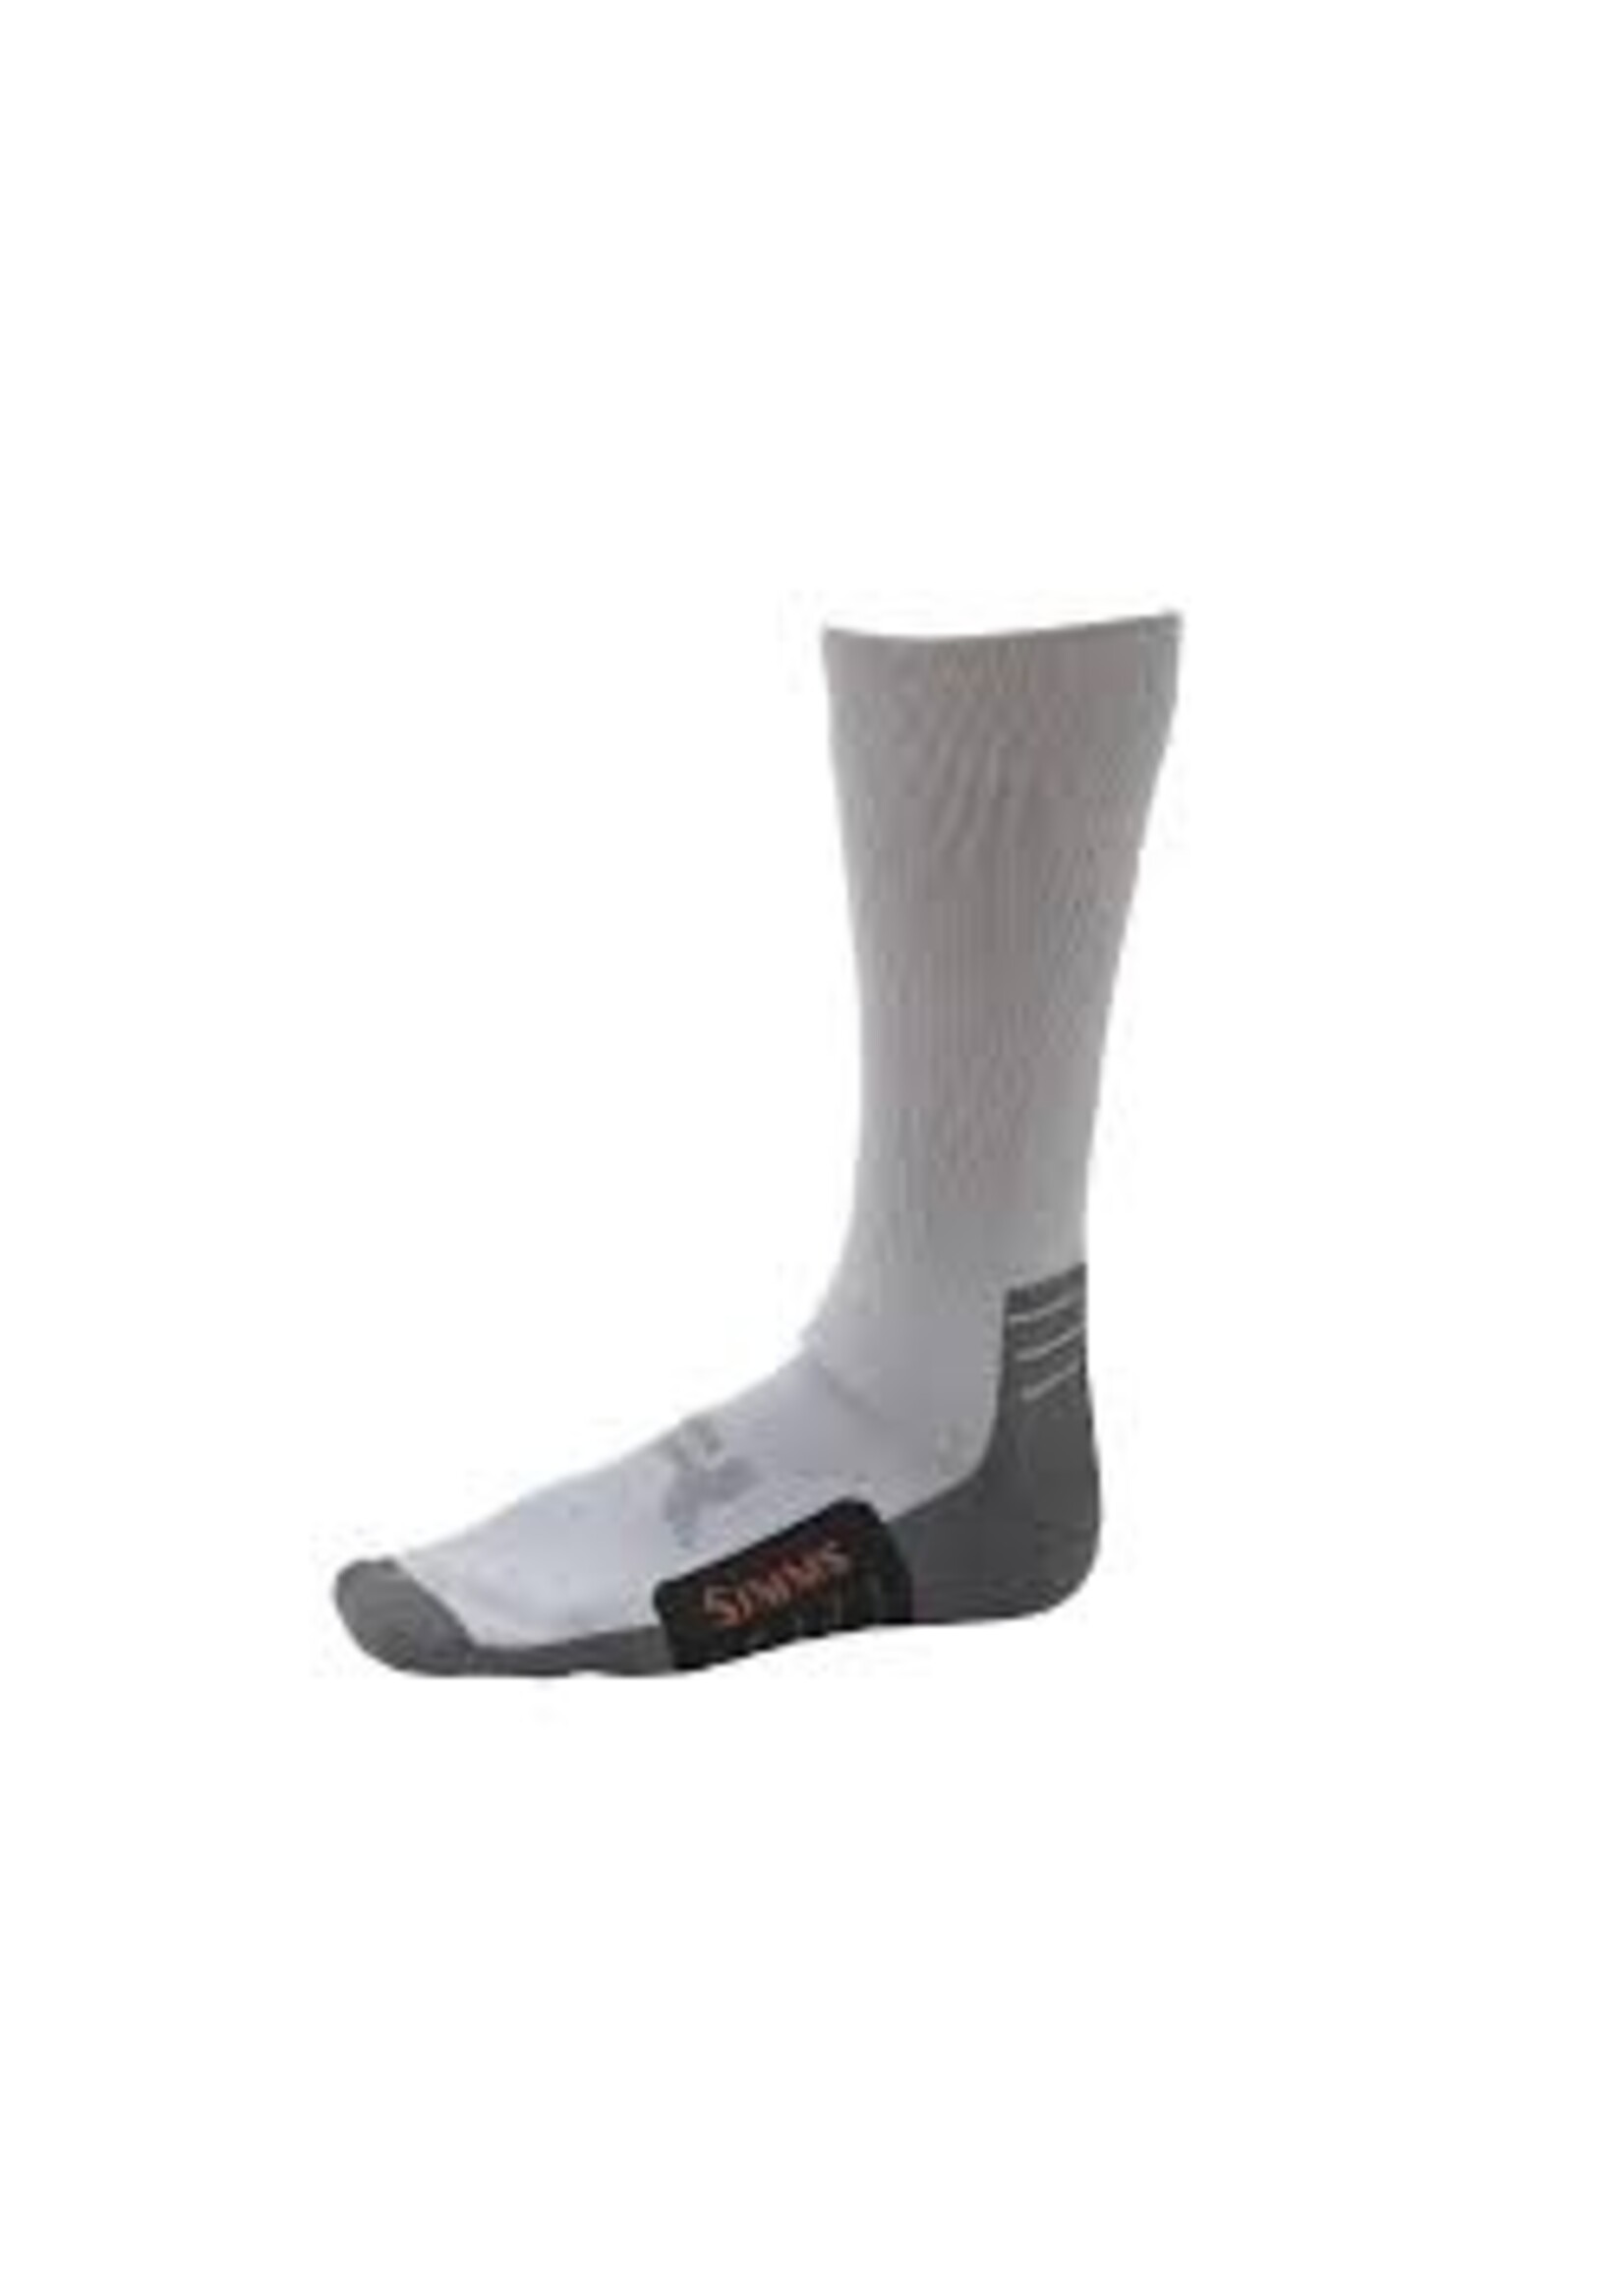 Simms Simms M's Guide Wet Wading Sock